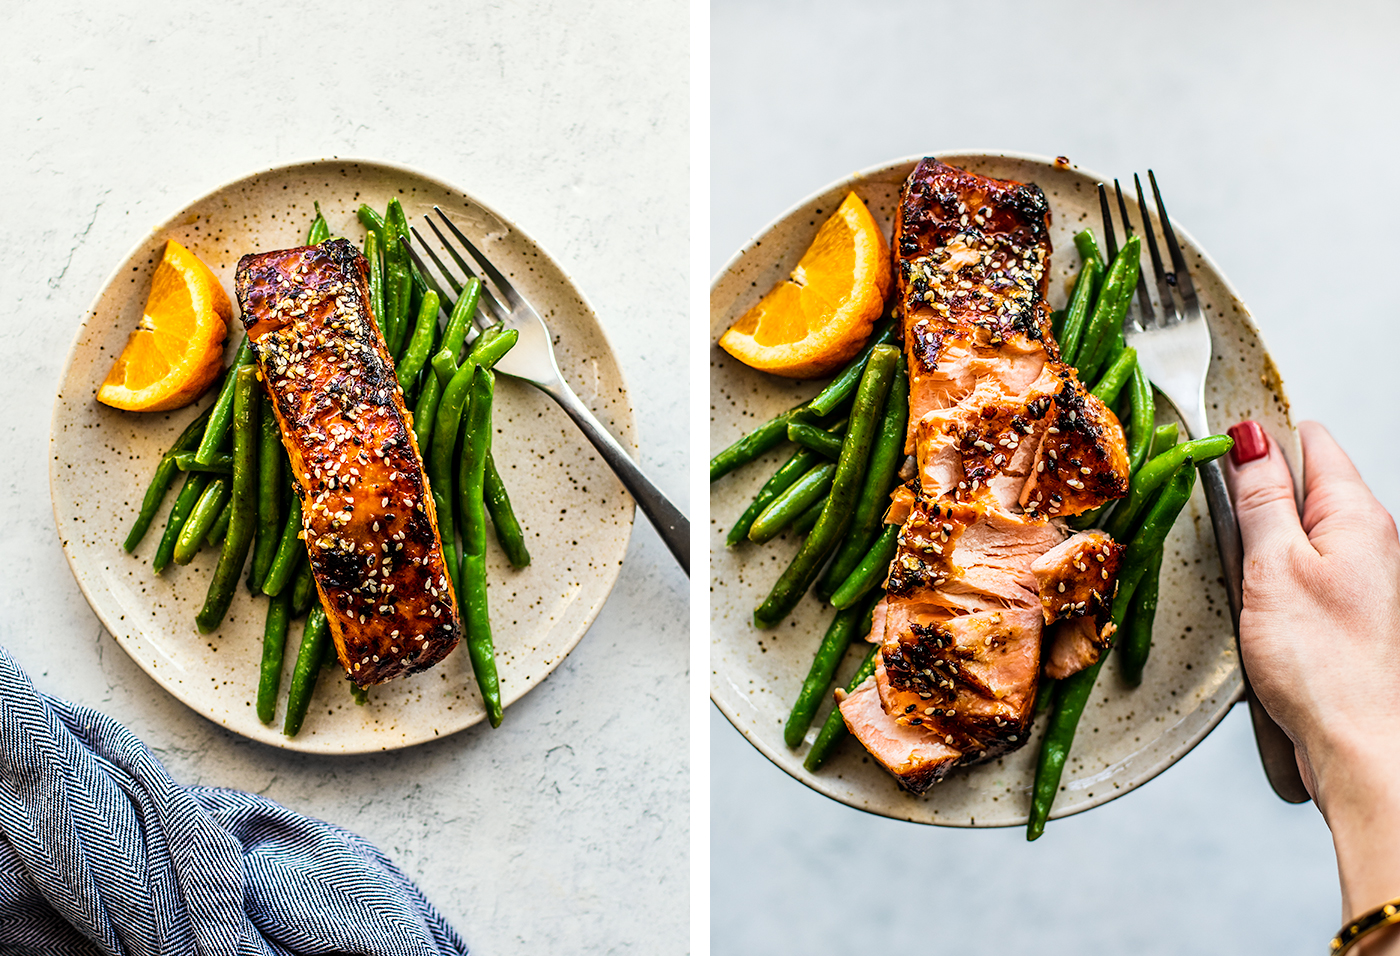 Left: plate of salmon over green beans; Right: salmone flaked by a fork over green beans.